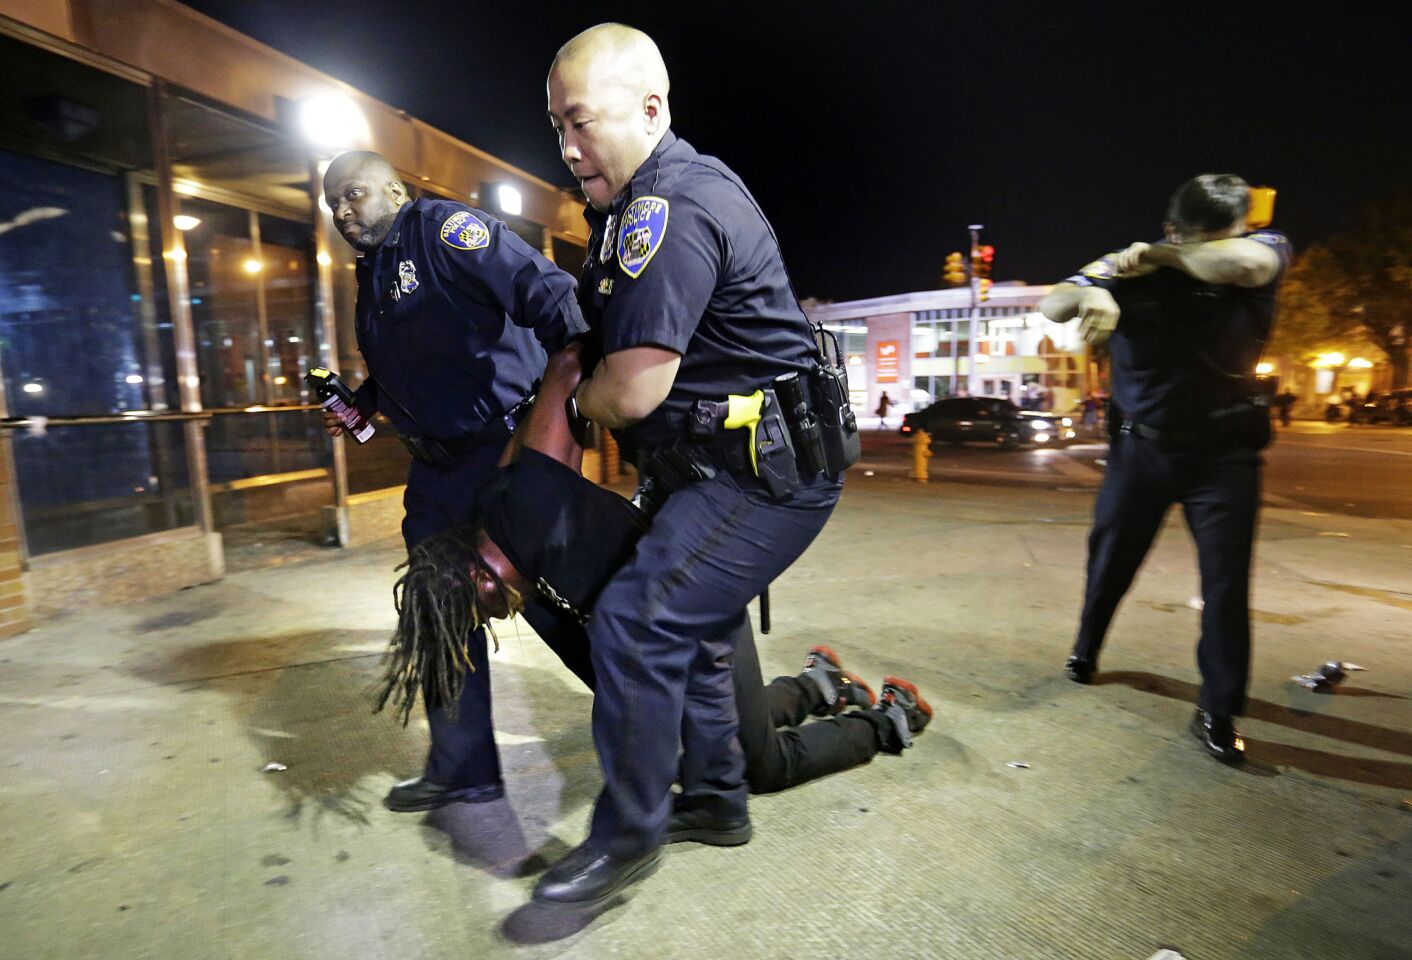 Police carry a man after he was arrested and hit with pepper spray as officers enforced a 10 p.m. curfew Saturday in Baltimore.